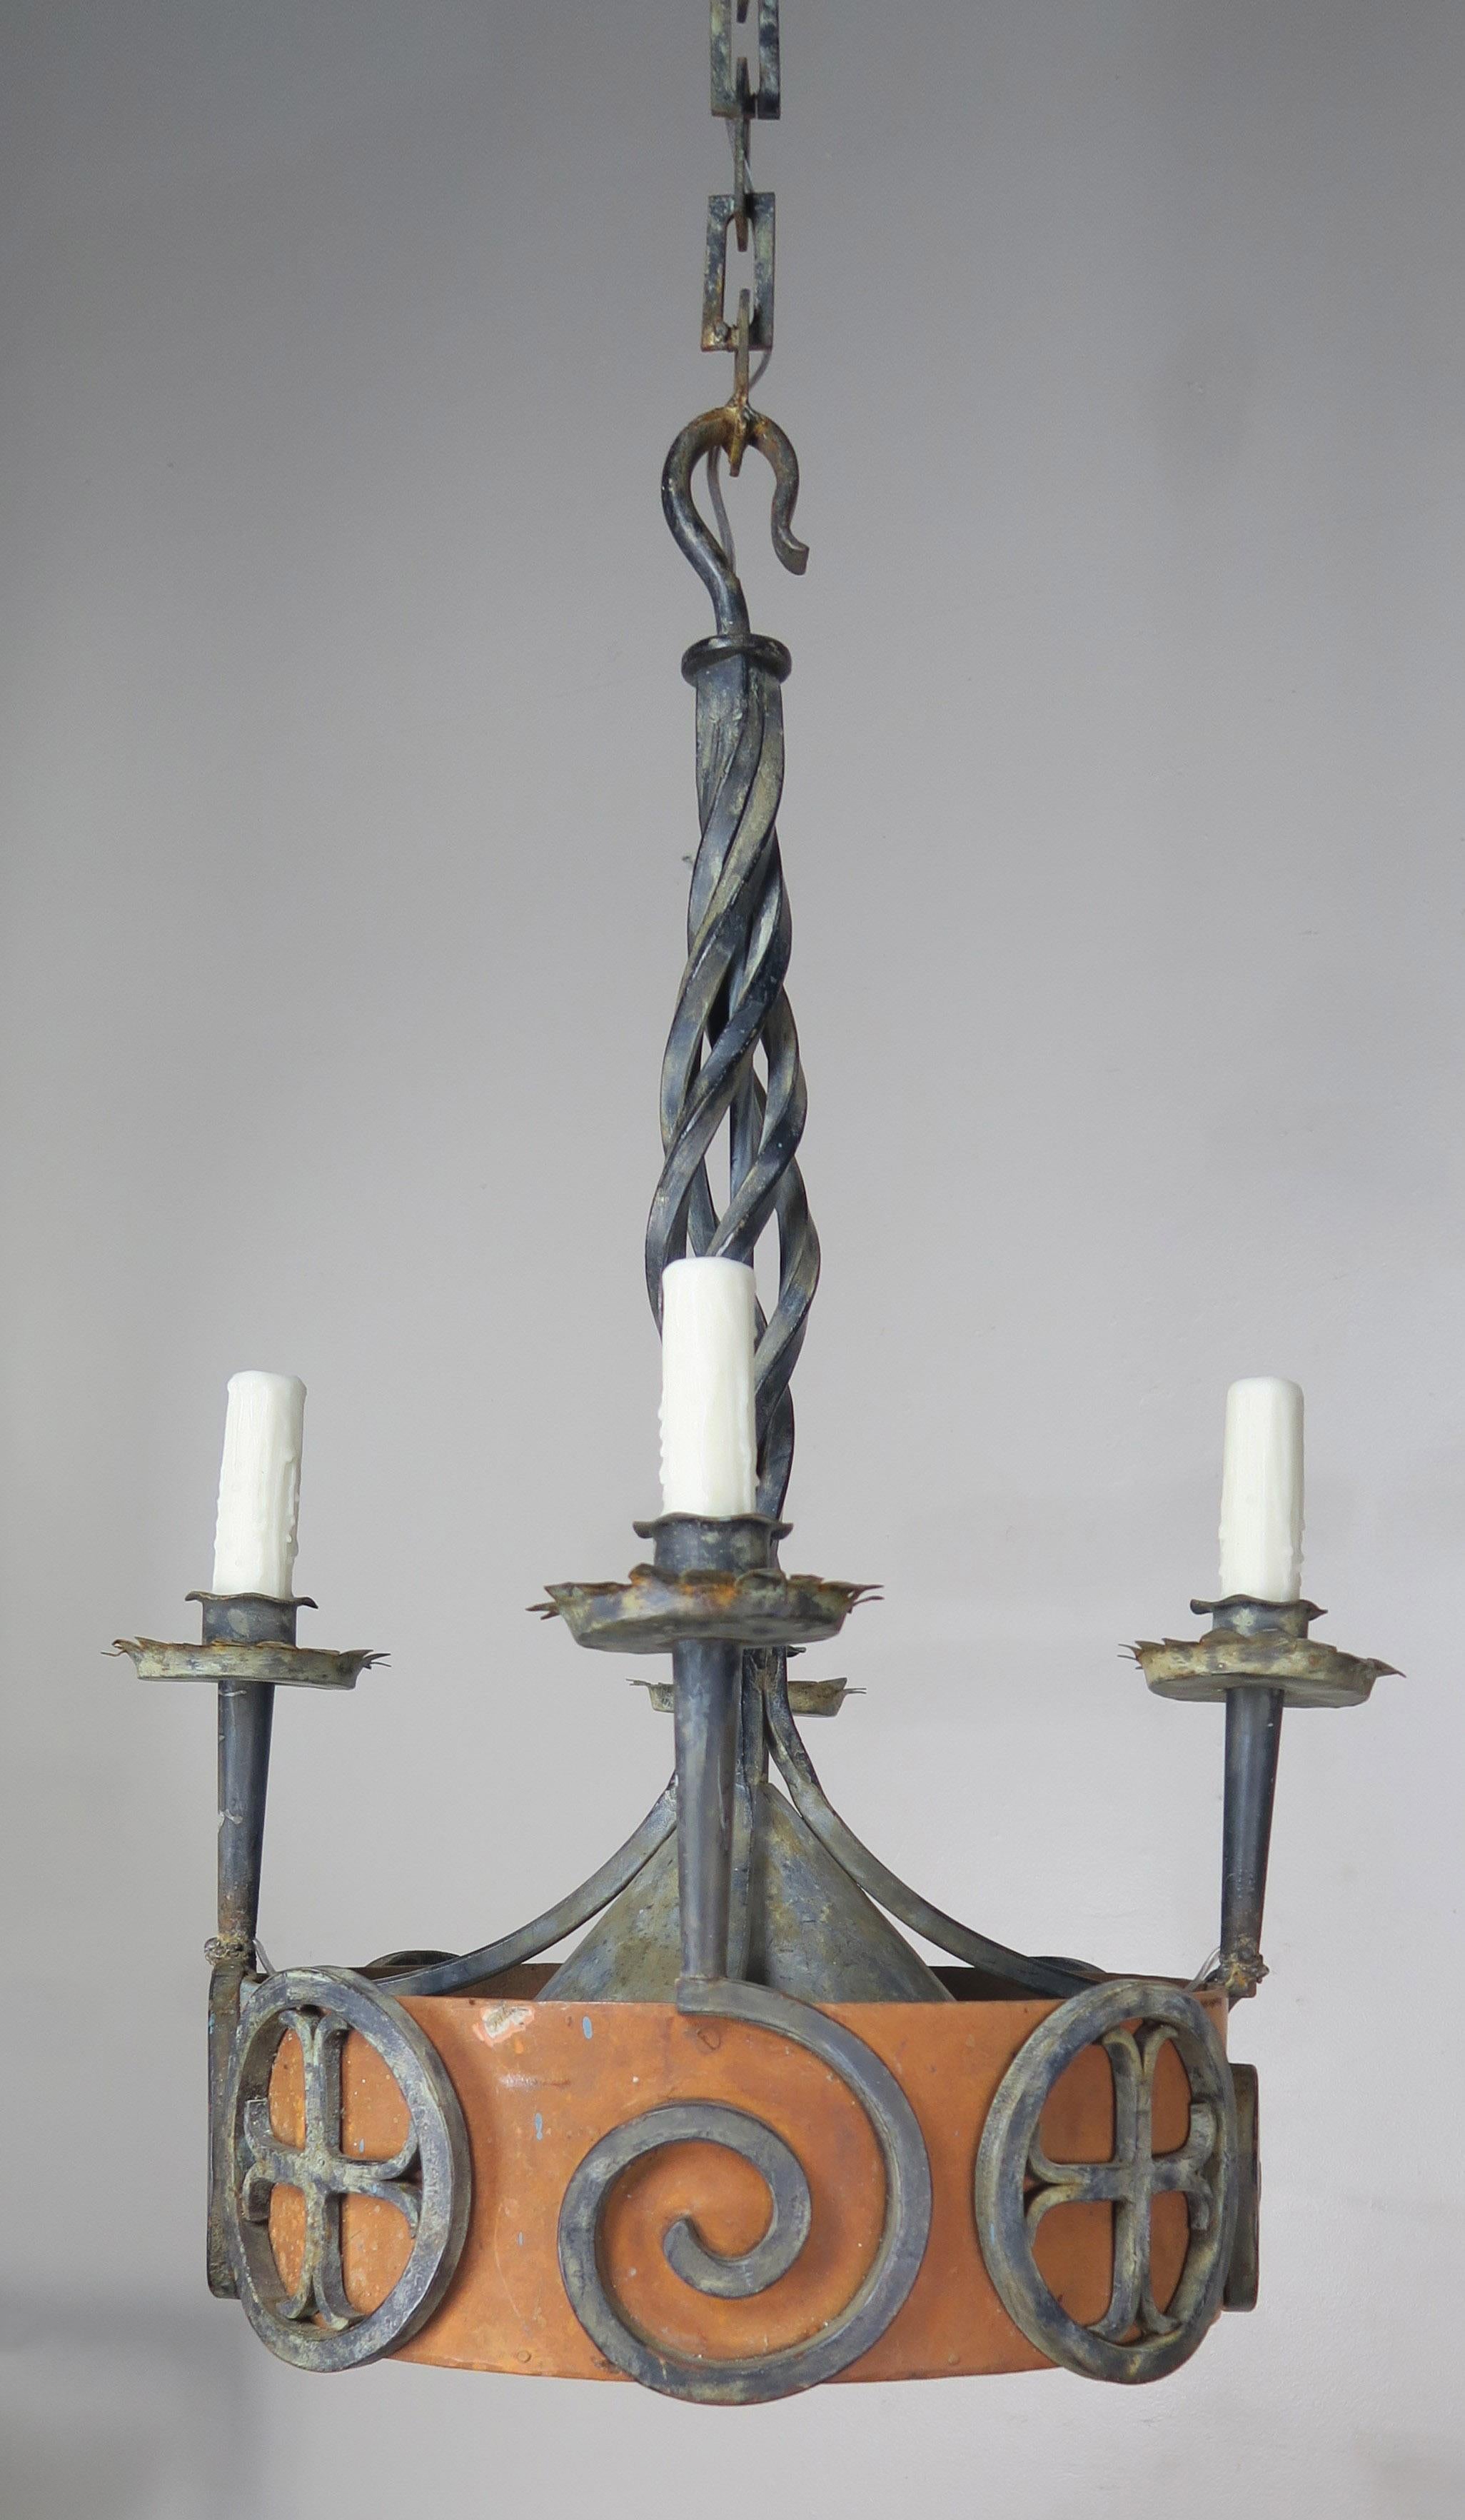 19th century Spanish Gothic style wrought iron painted chandelier. The fixture is newly rewired with drip wax candle covers. Includes chain and canopy.